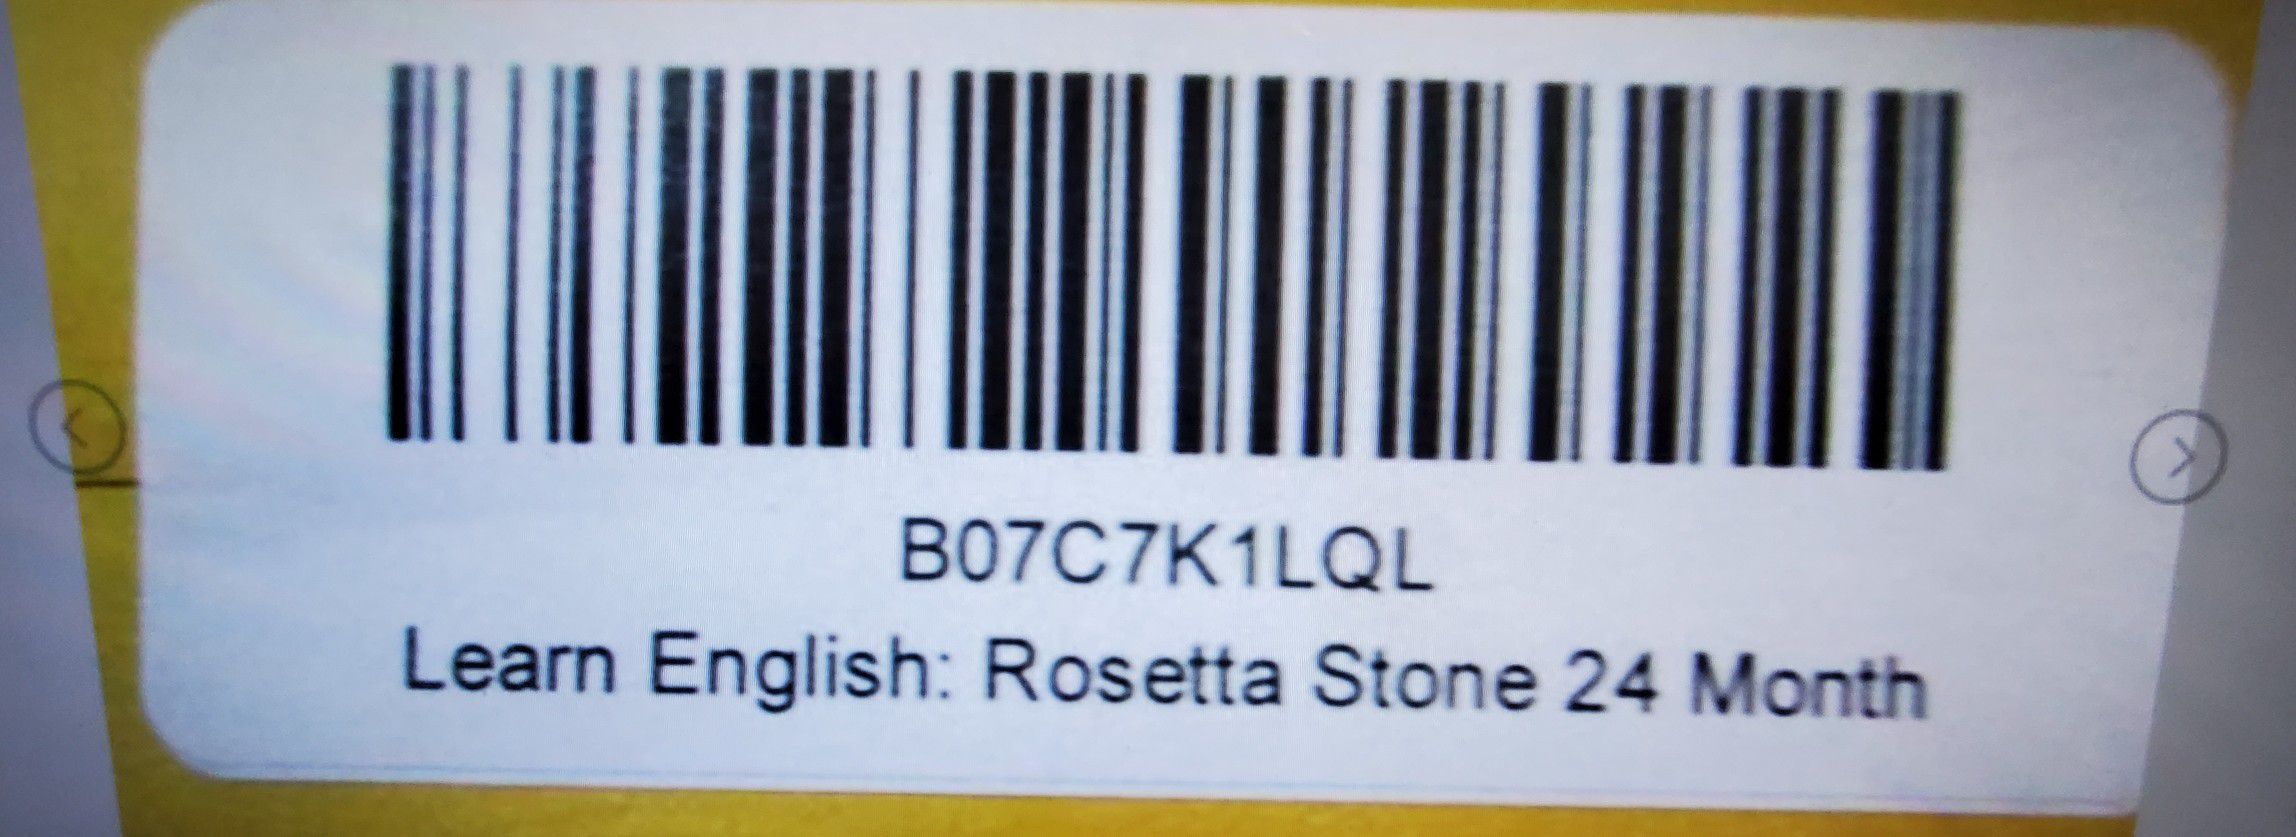 Rosetta stone 24 month learn english at your own speed amazing